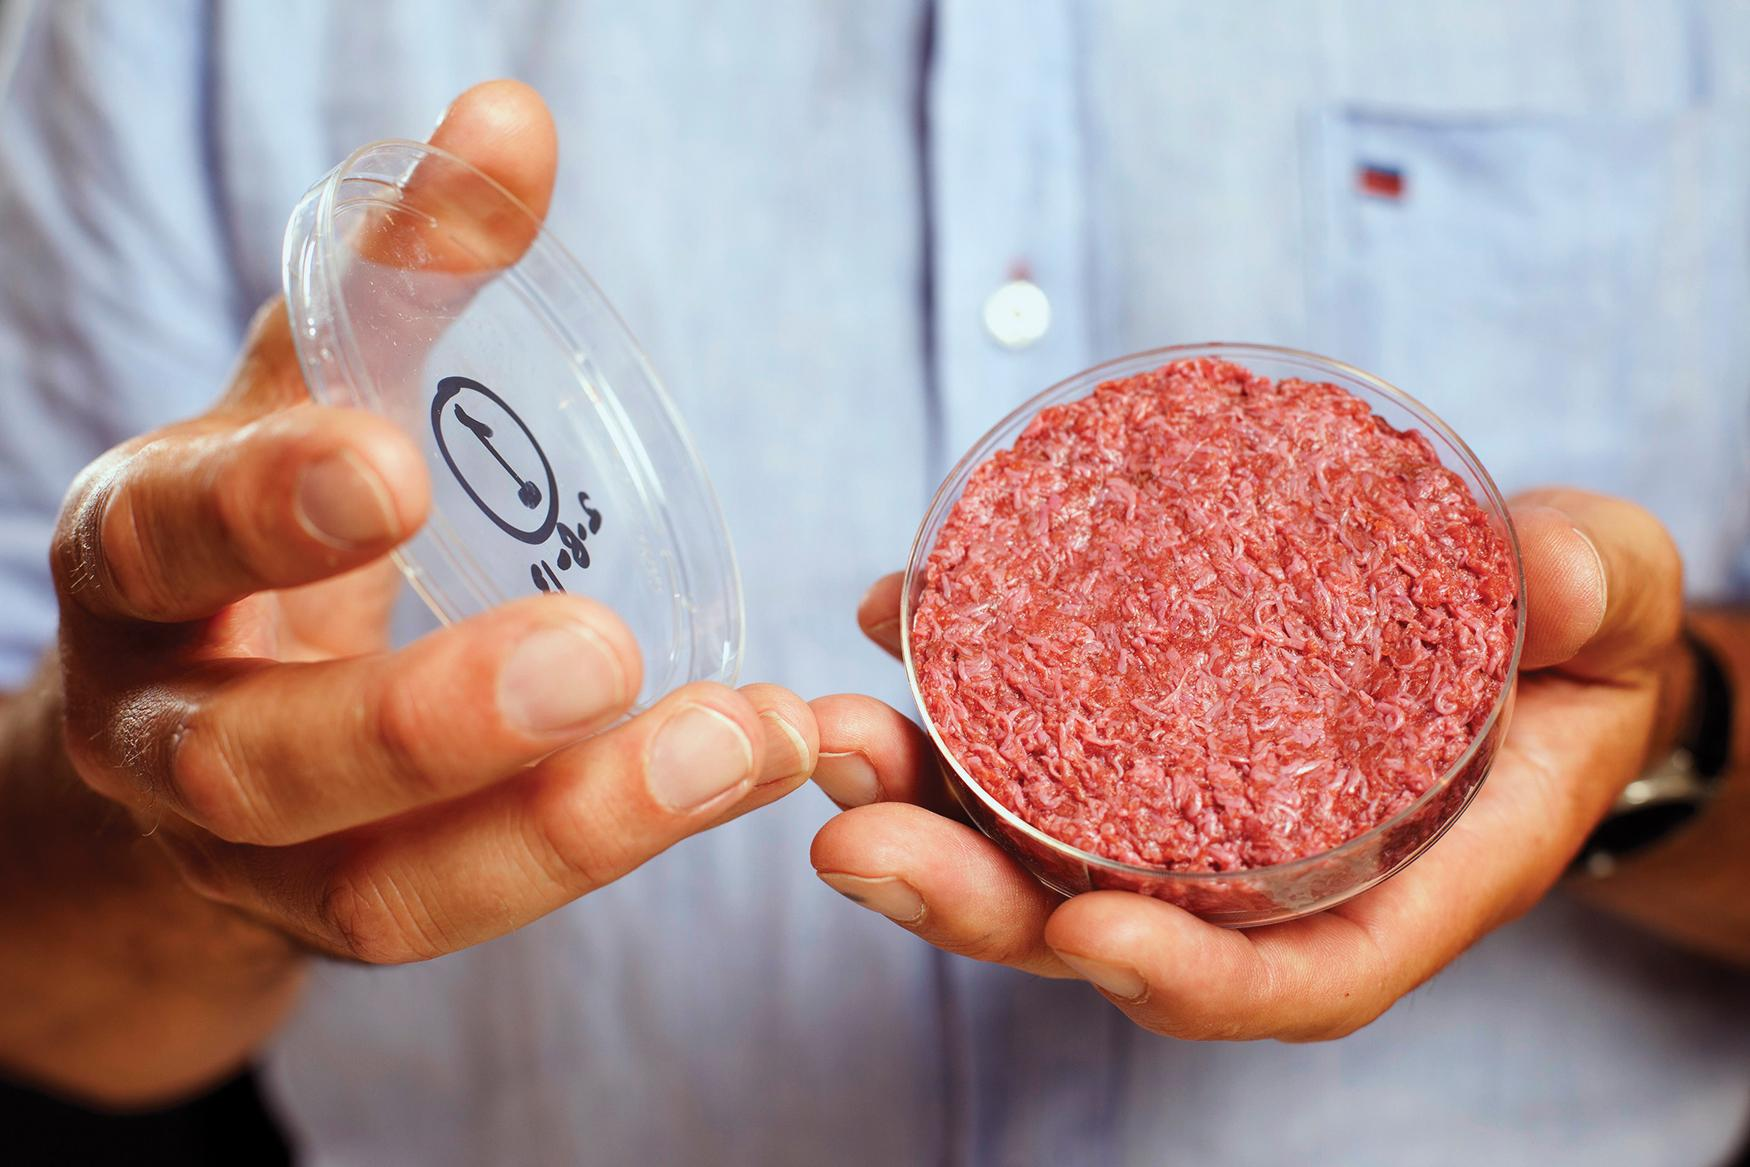 What Does It Take To Make Meat From Stem Cells?